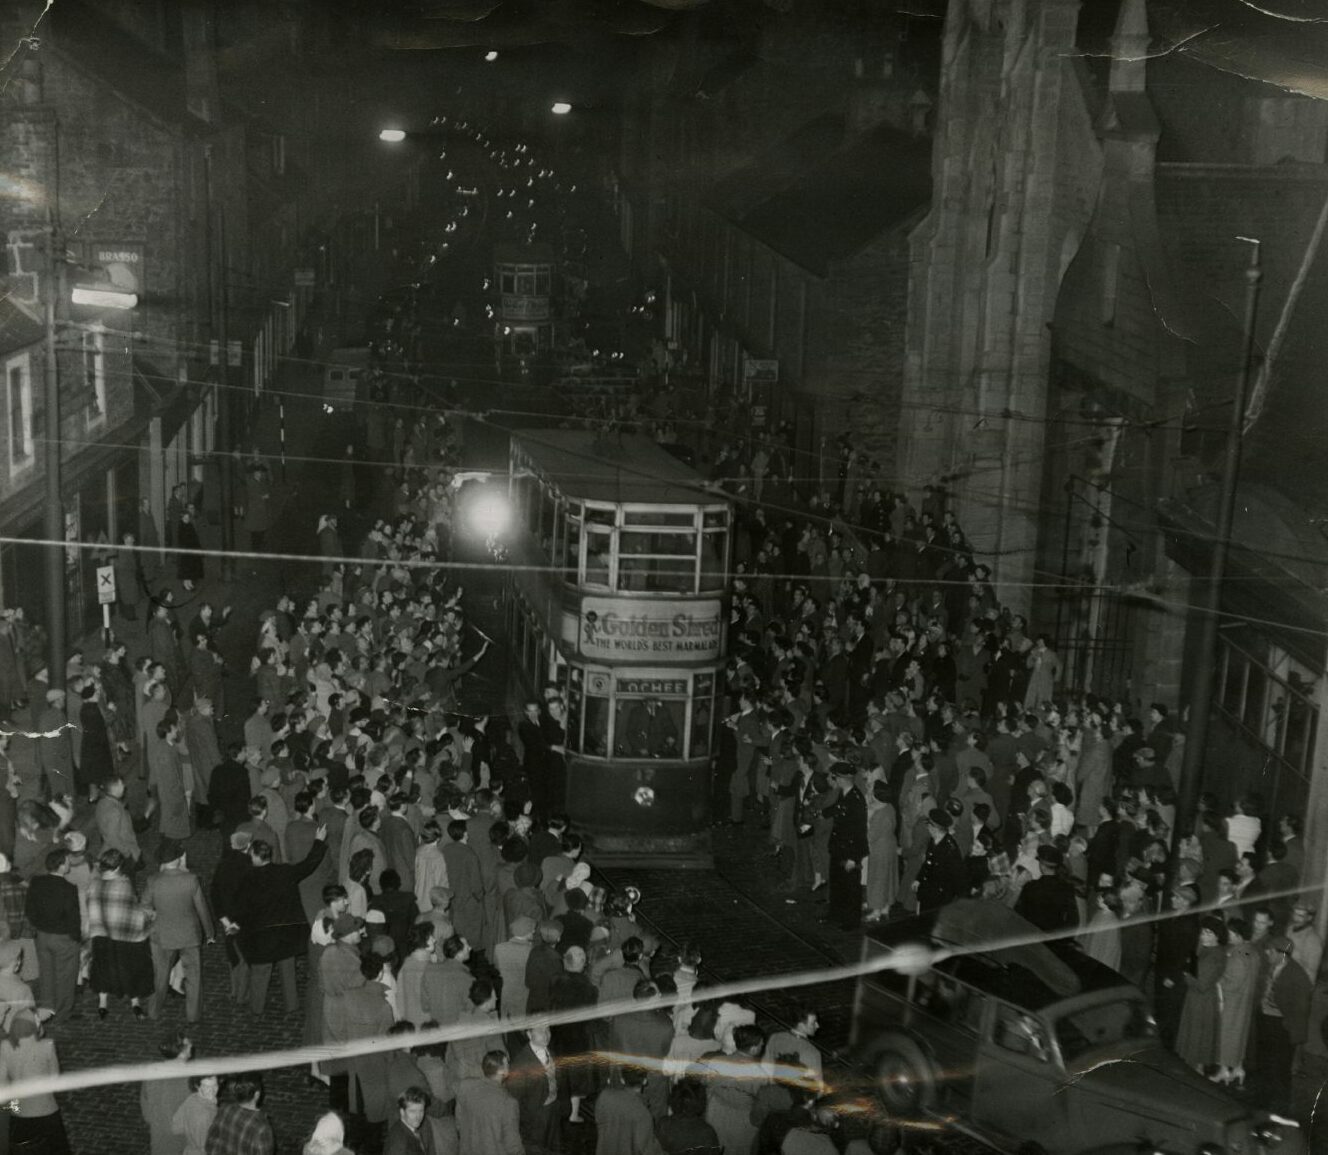 The tram arriving at Lochee Depot surrounded by thousands of people. 